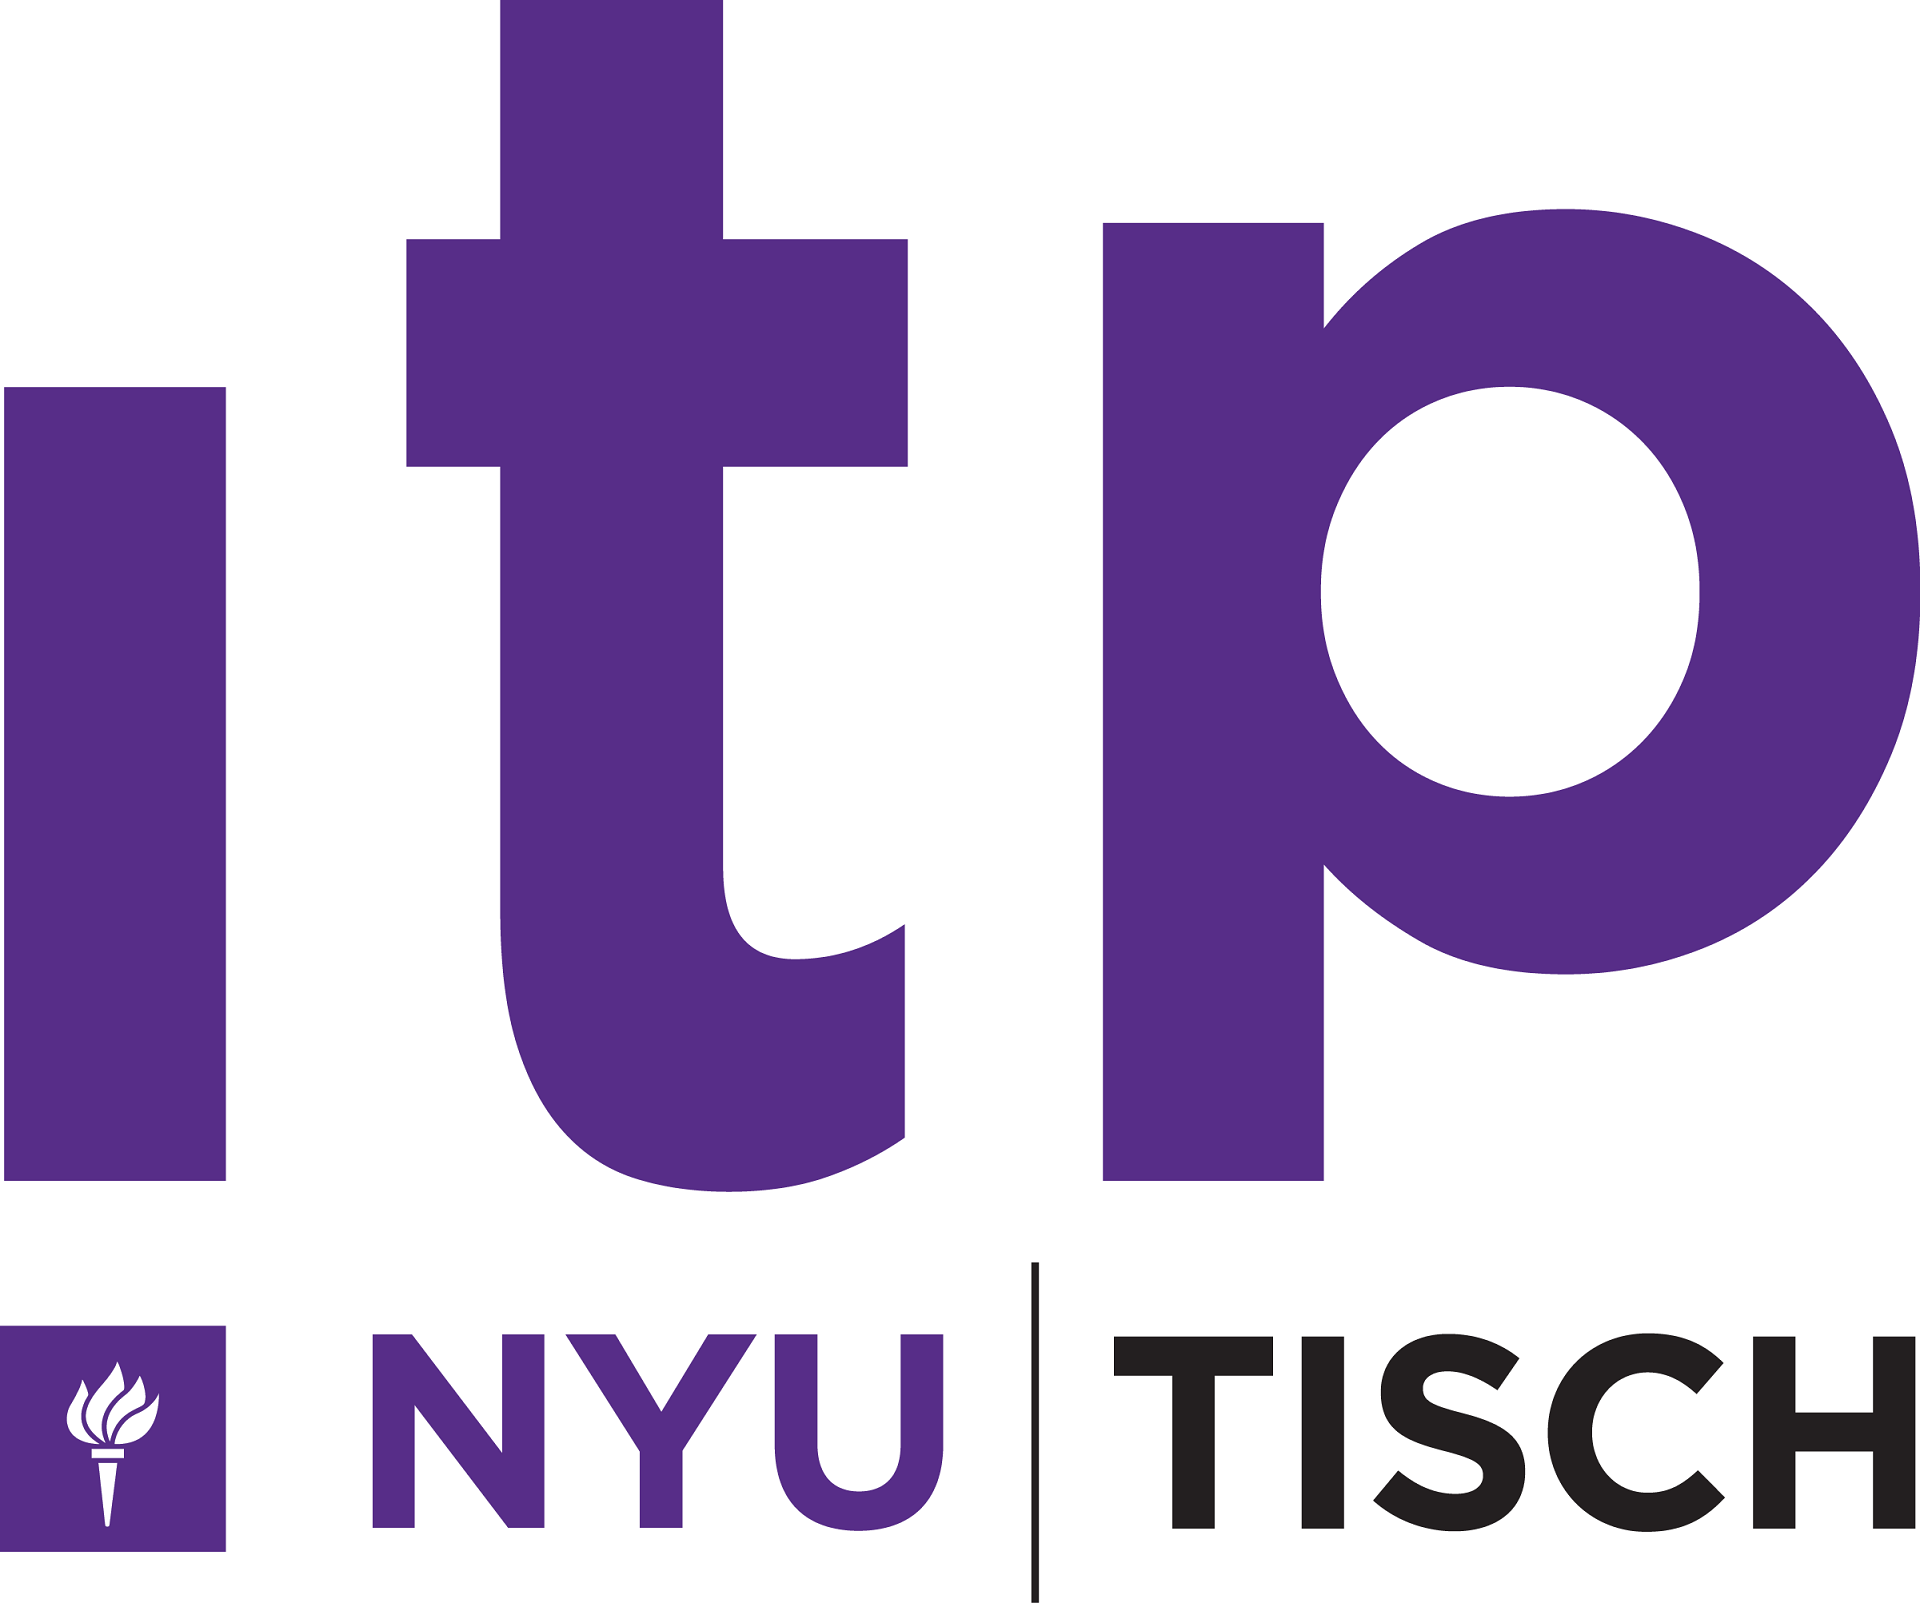 Image of ITP logo in purple.